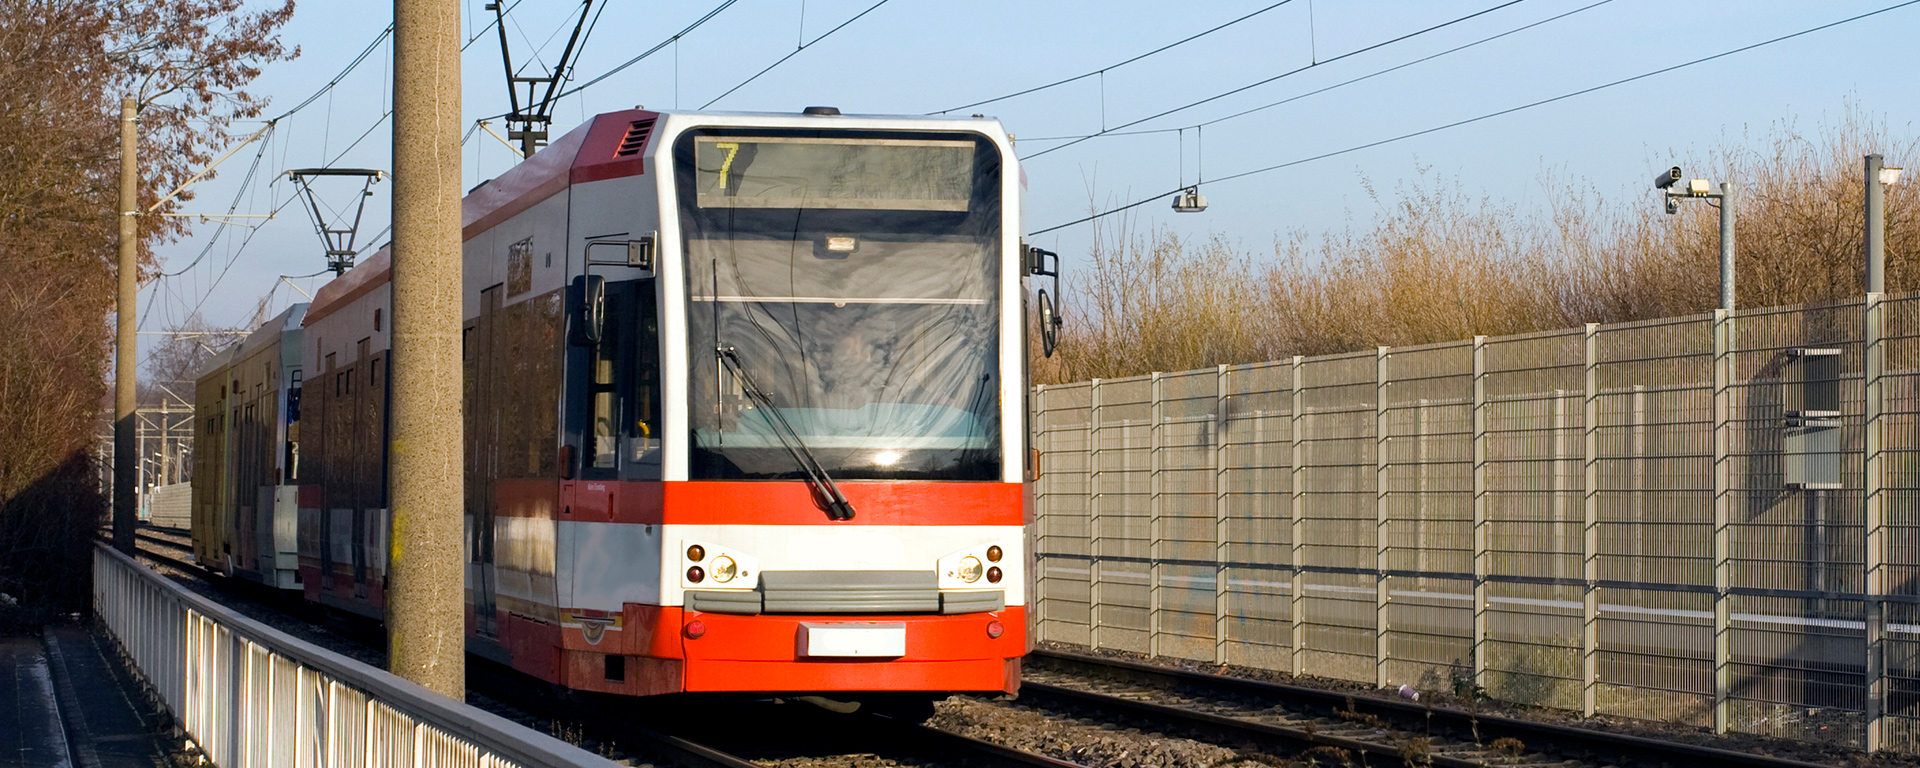 EQOS Stadtbahn Wesseling